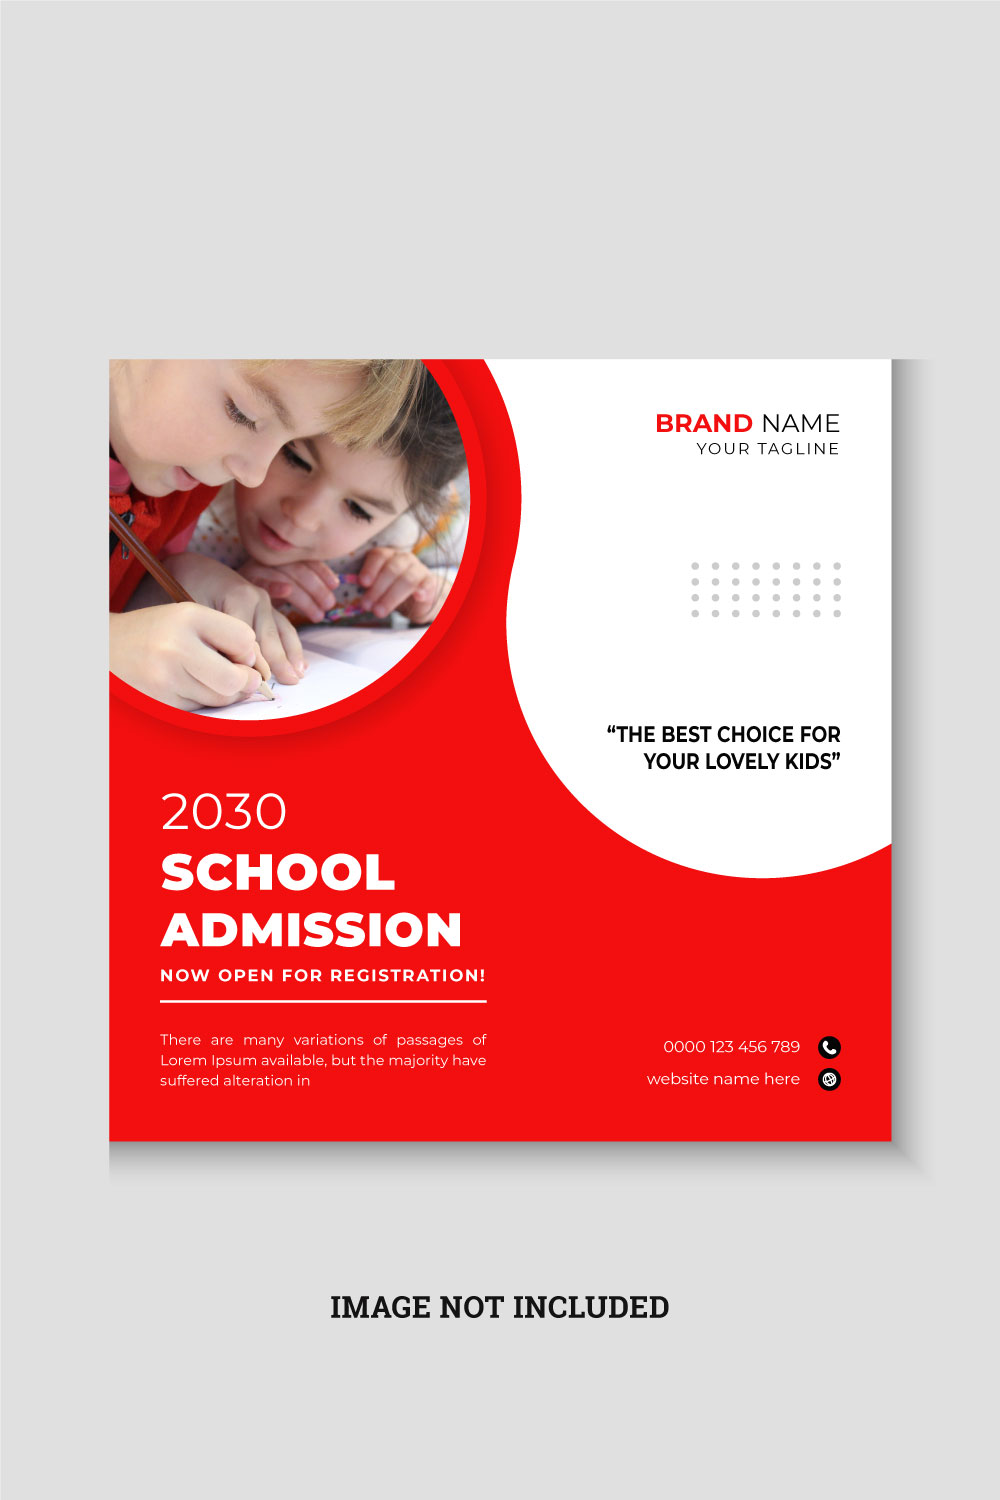 School admission square banner pinterest preview image.